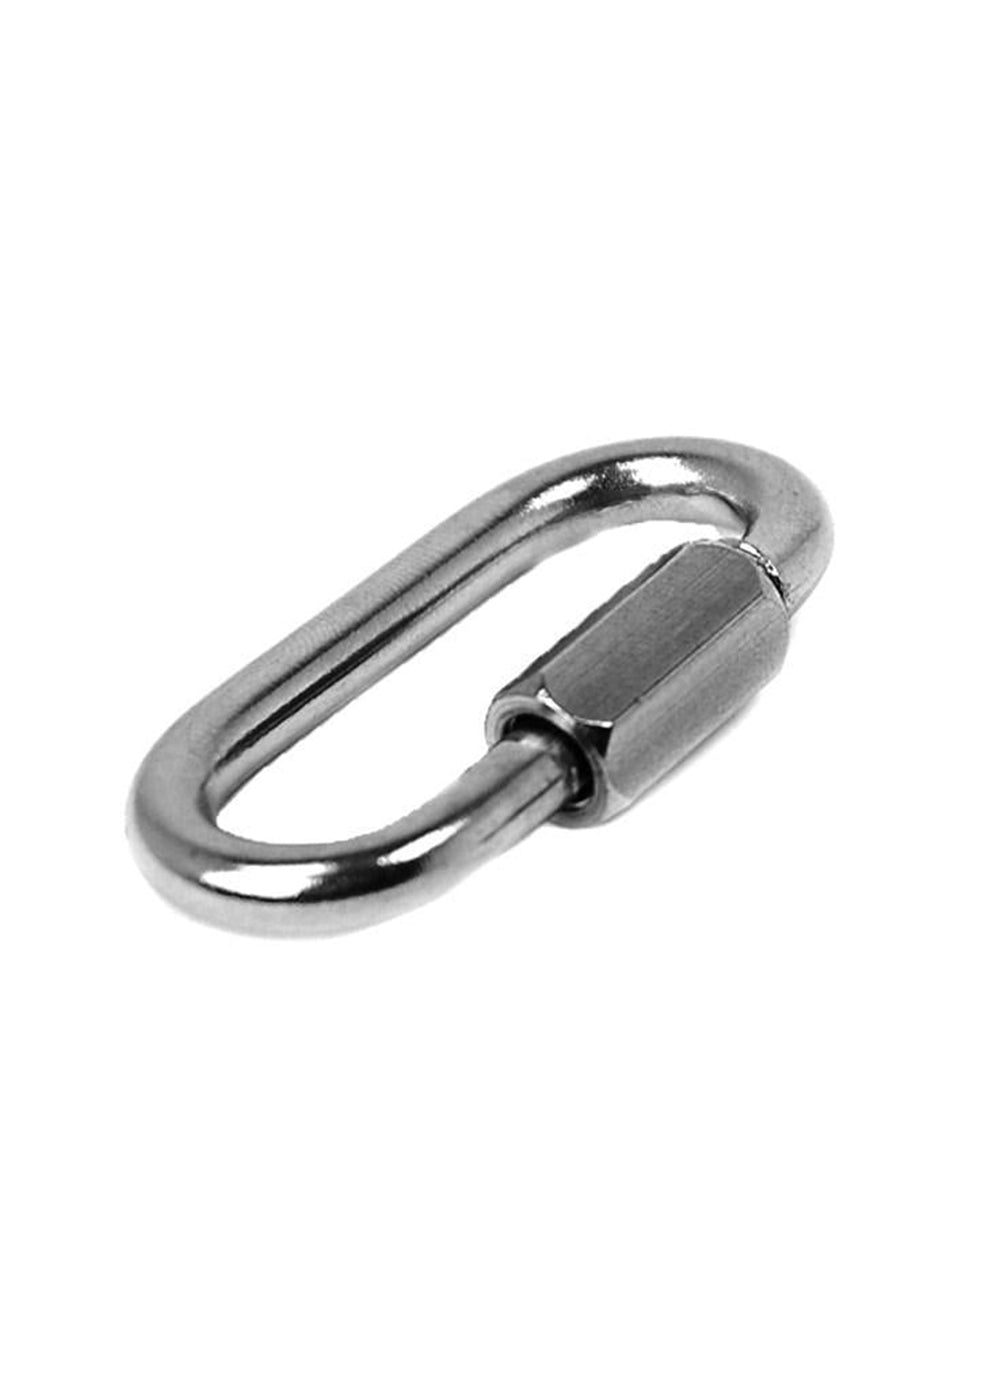 Problue Stainless Steel Quick Link Large